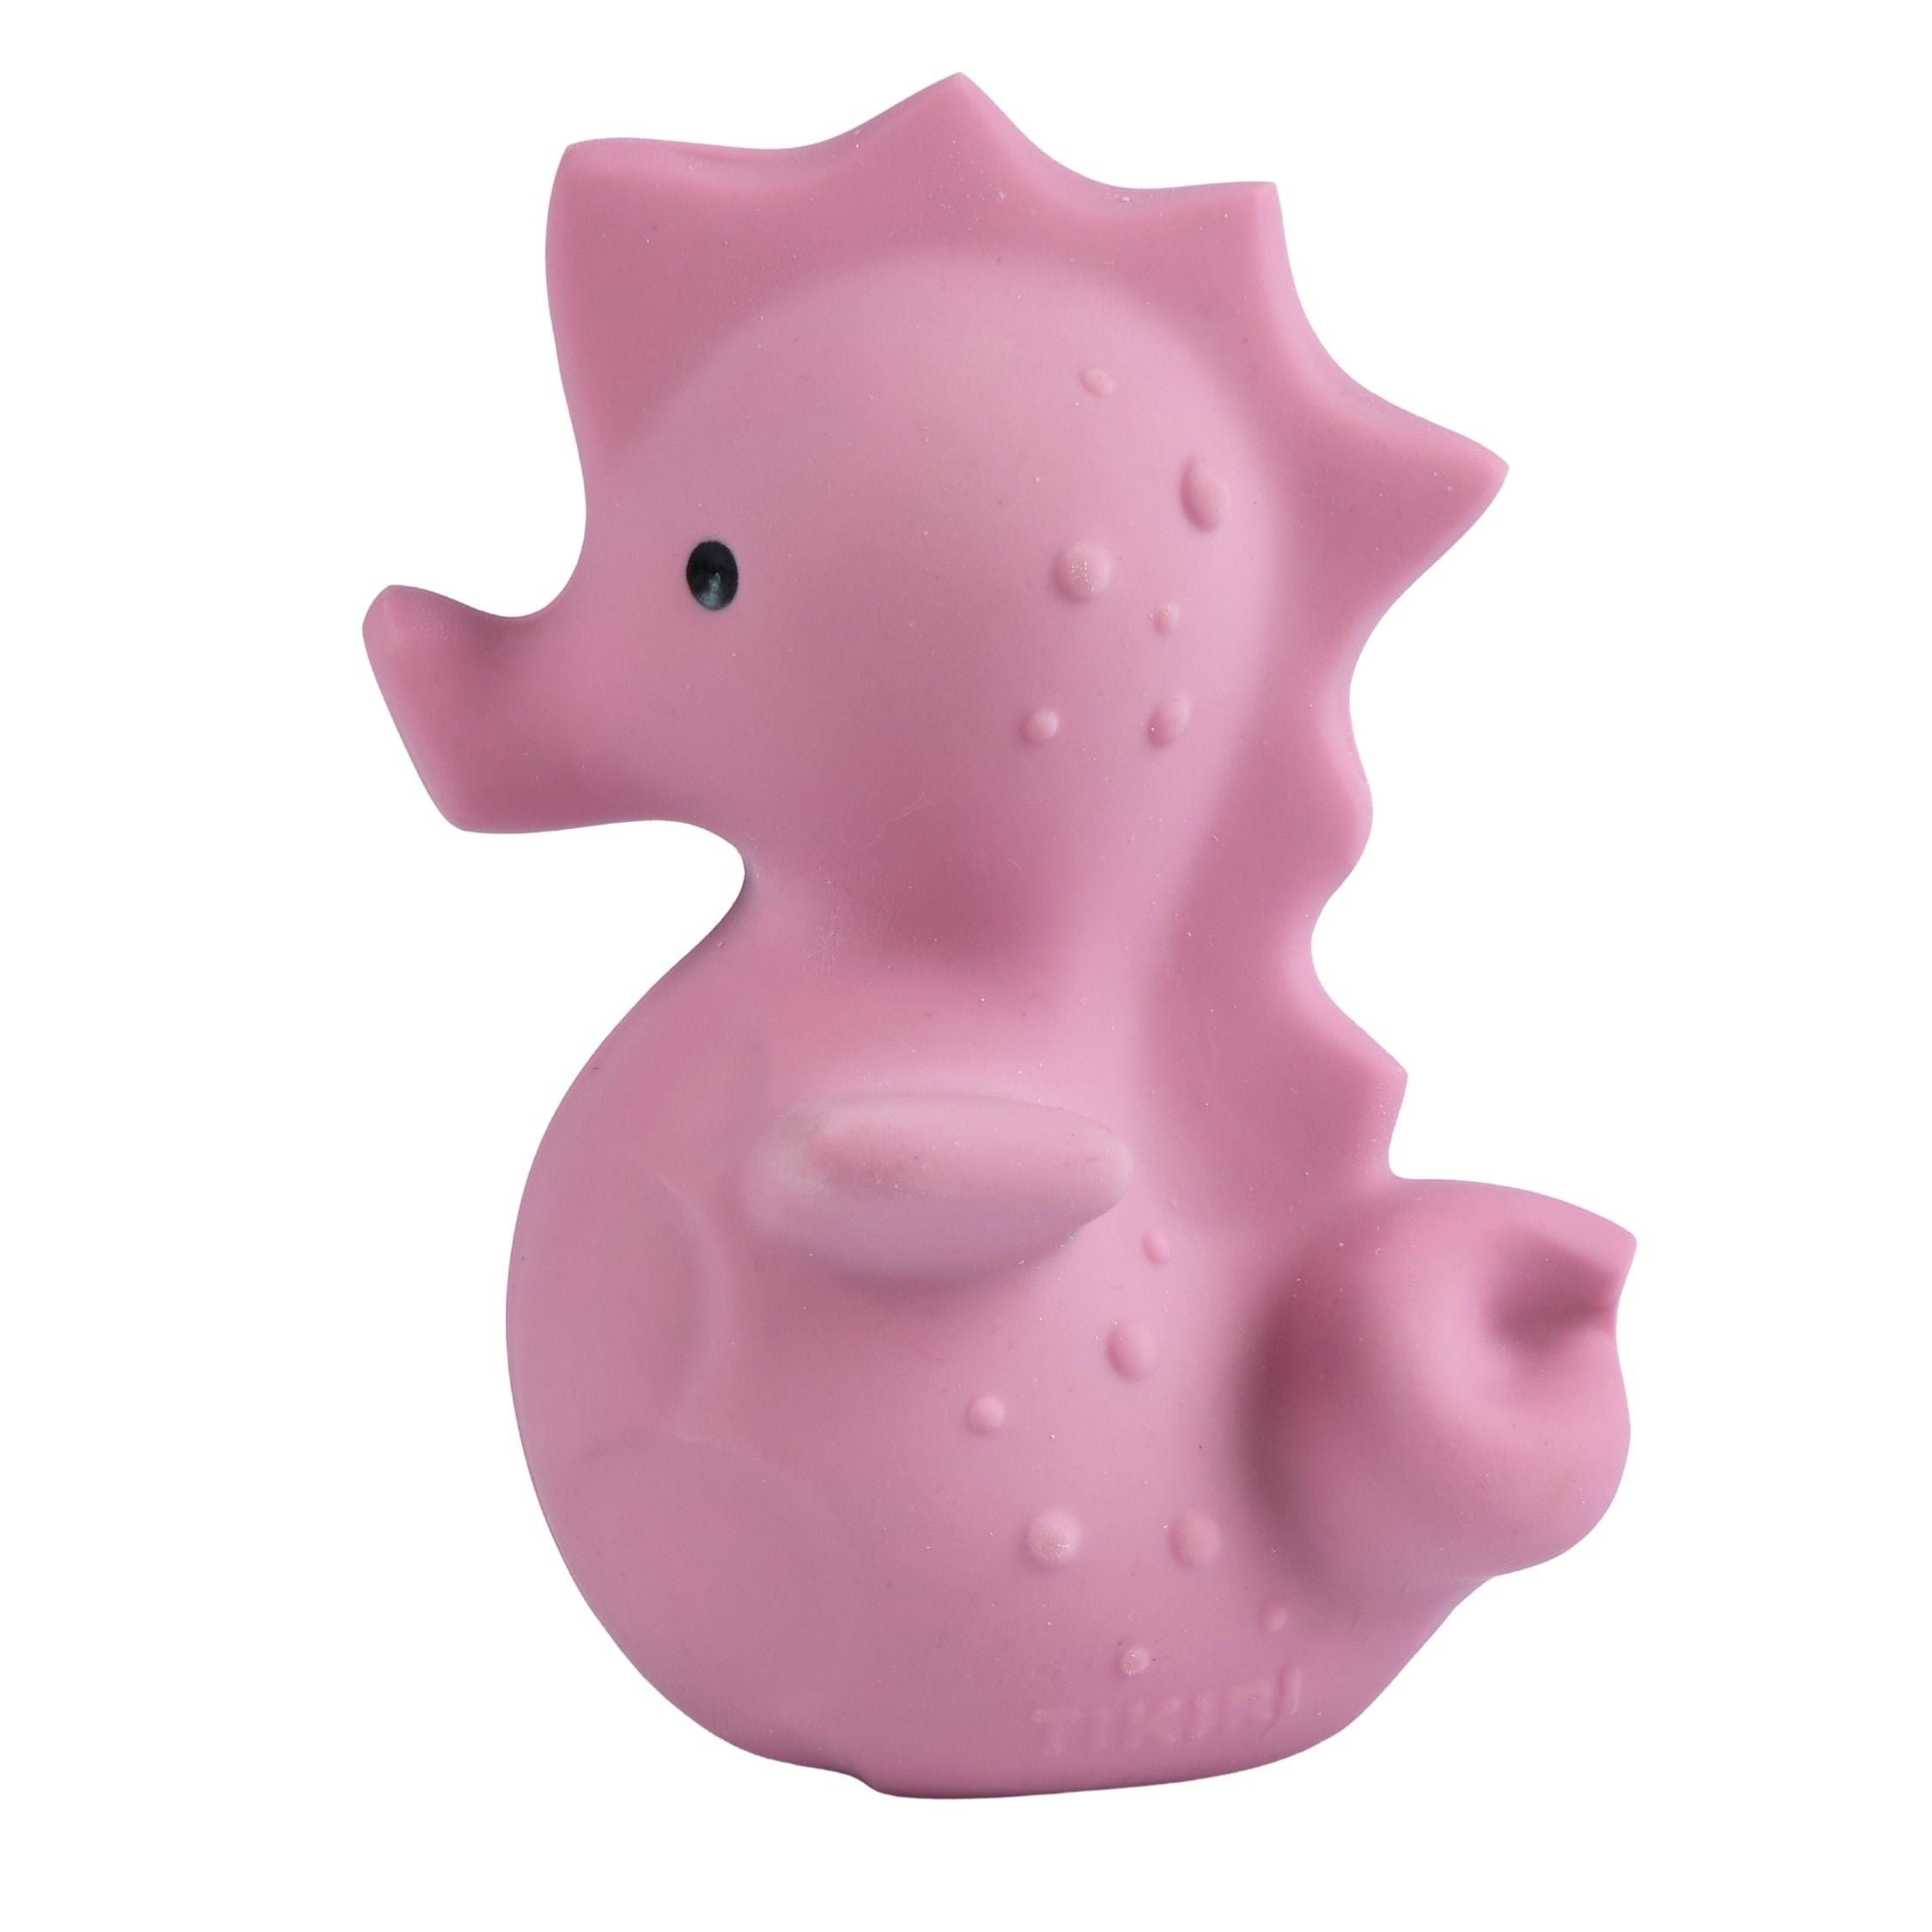 SEA HORSE - Organic Natural Rubber Teether, Rattle & Bath Toy